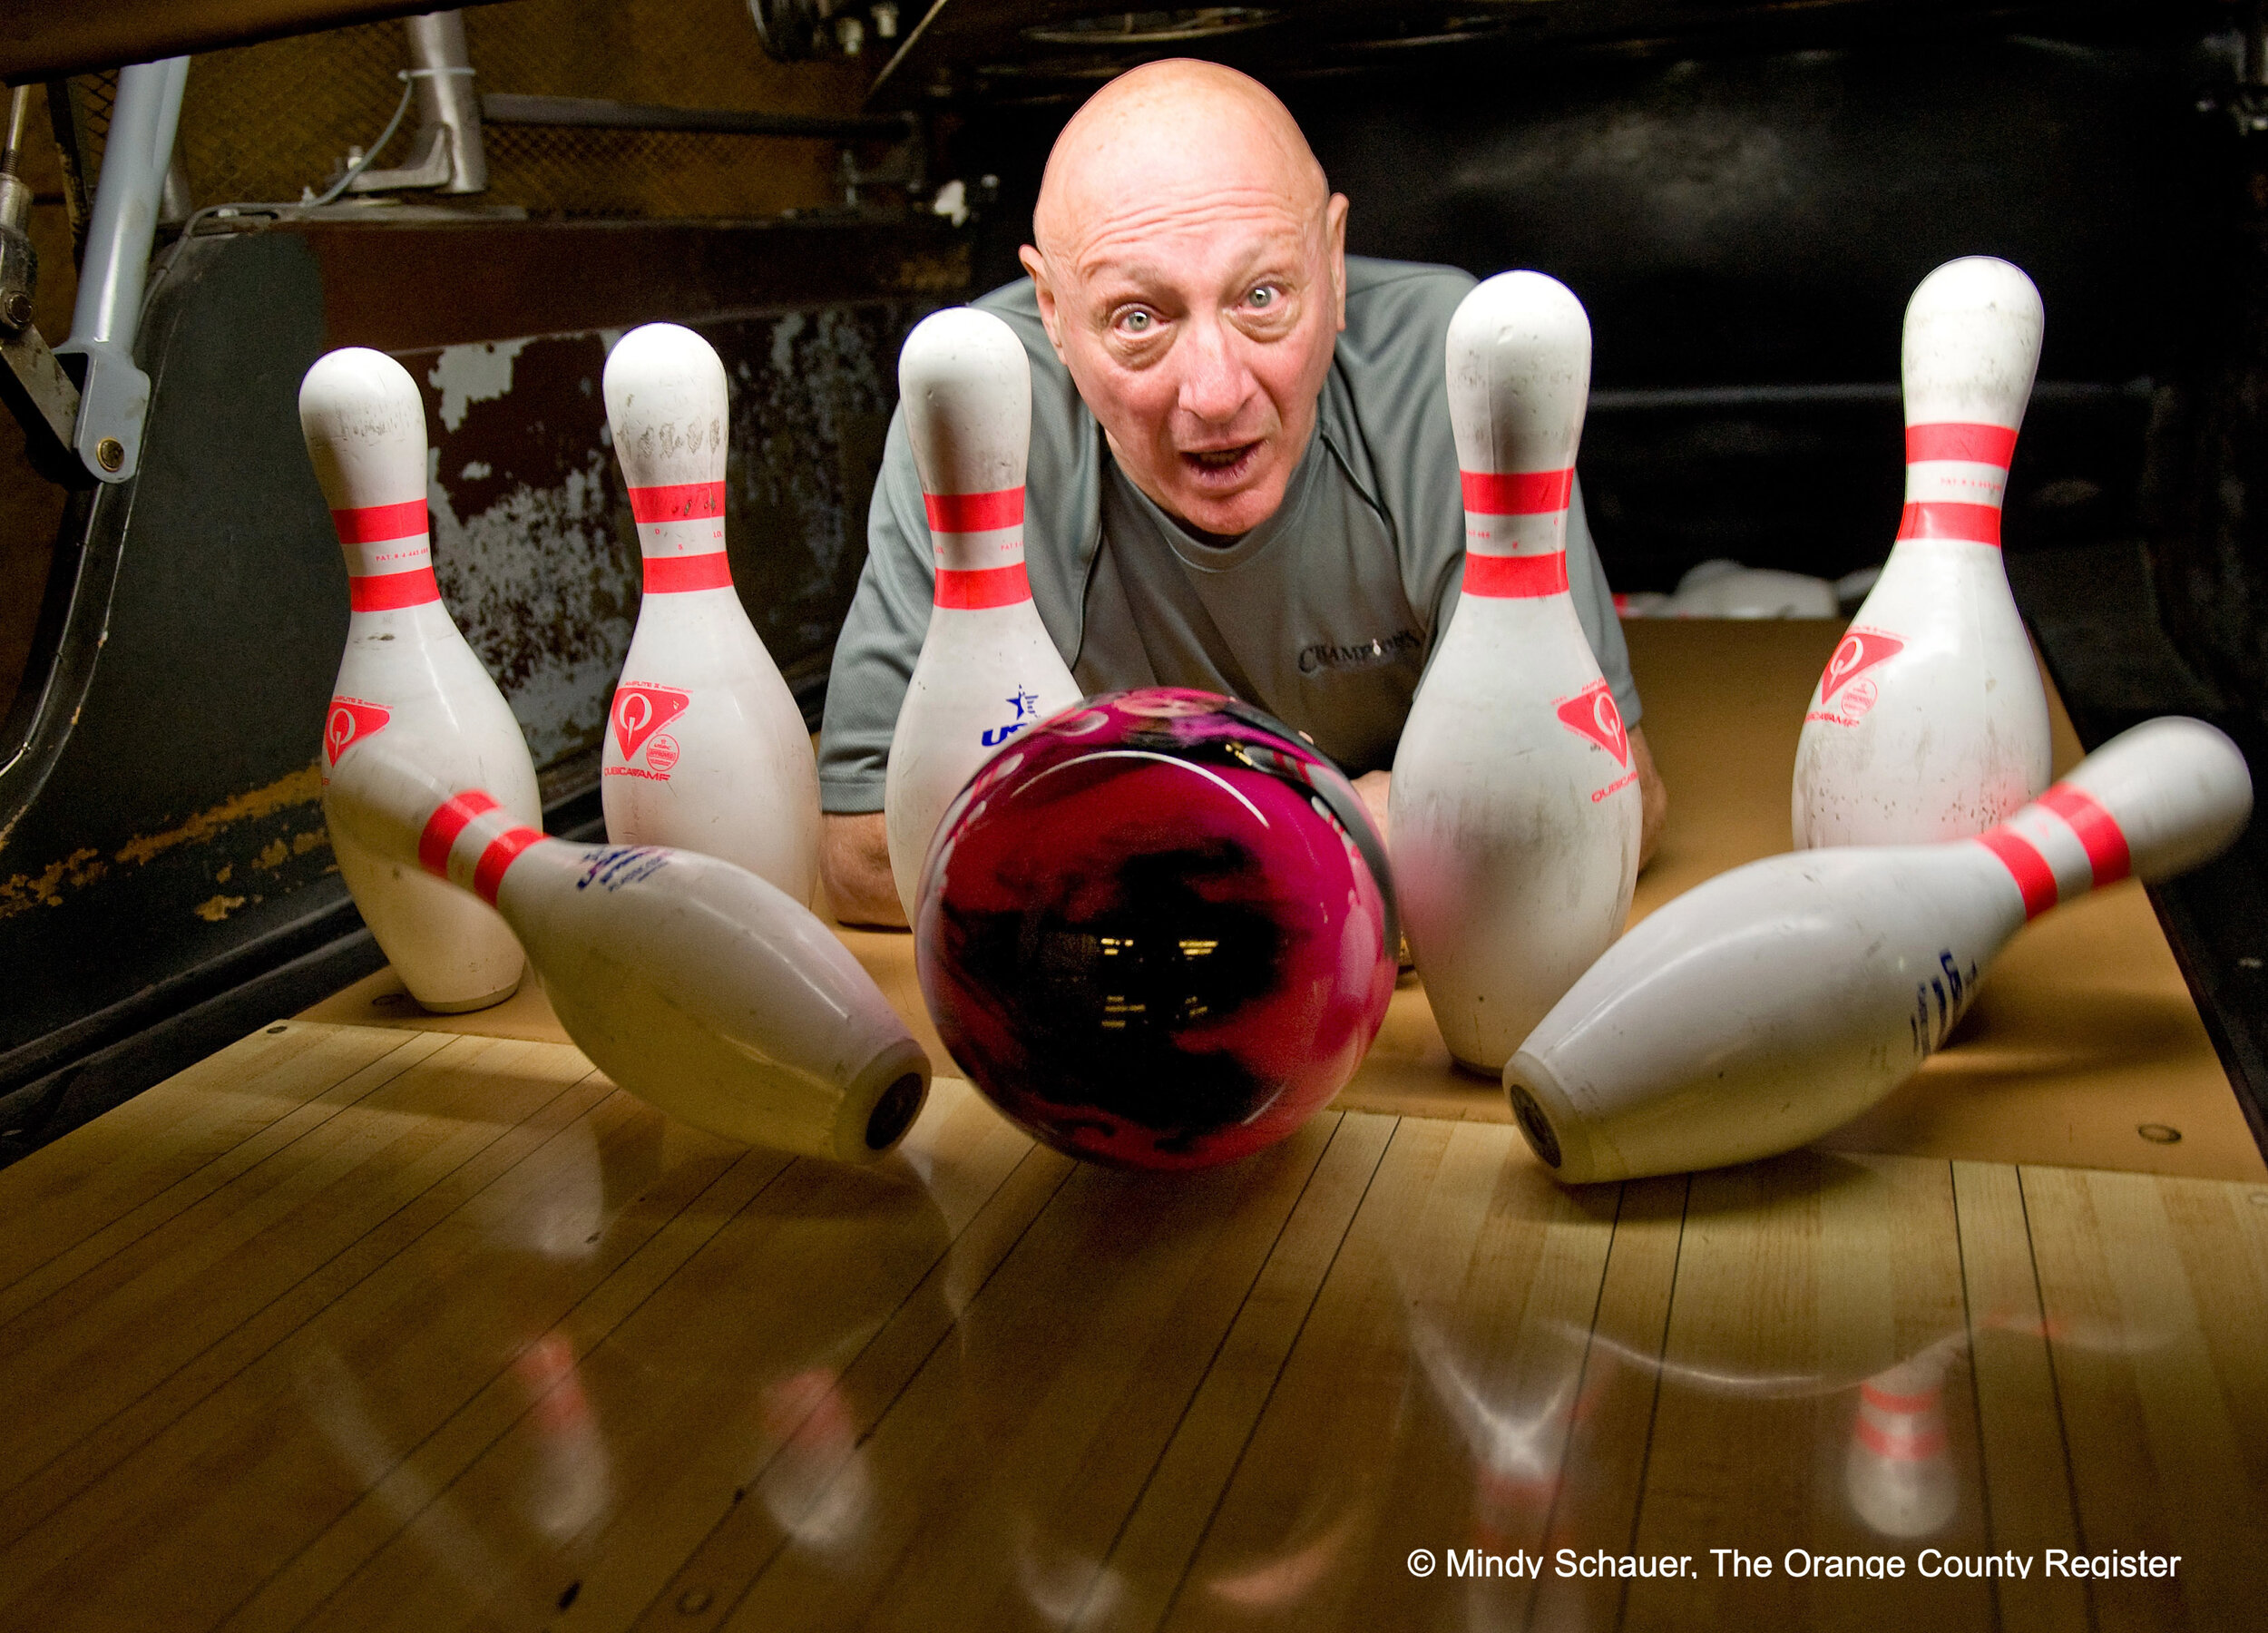  Barry Asher runs the pro shop at Fountain Bowl. He is also a world-class bowler who was hired by the Coen Brothers to be a bowling consultant for the movie "The Big Lebowski."Lebowski Fest is the annual gathering of fans of the Coen Brothers' movie 